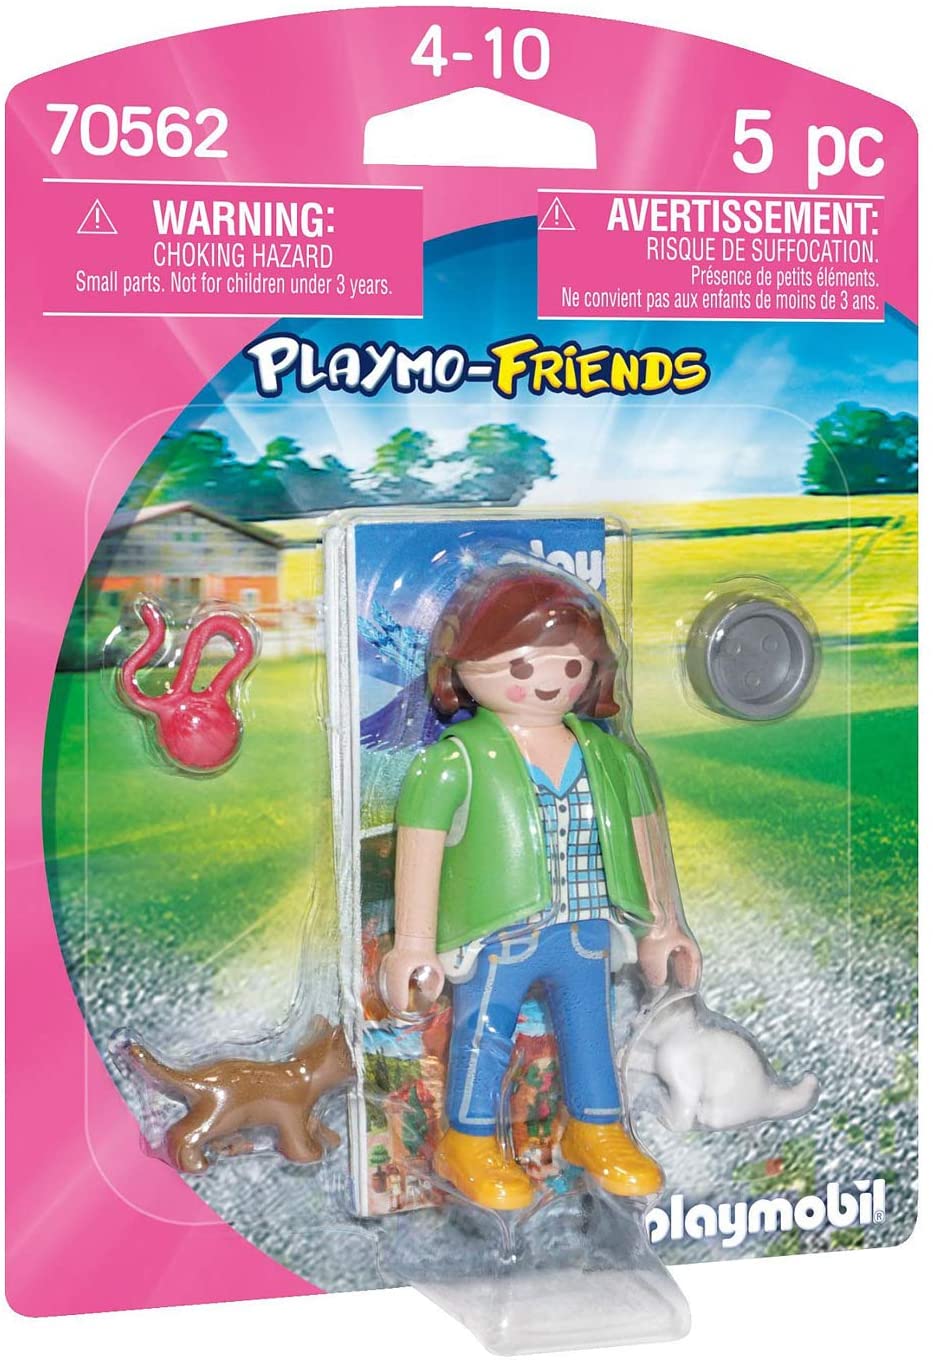 Playmobil 70562 Playmo-Friends Boy with RC Car, for Children Ages 4+